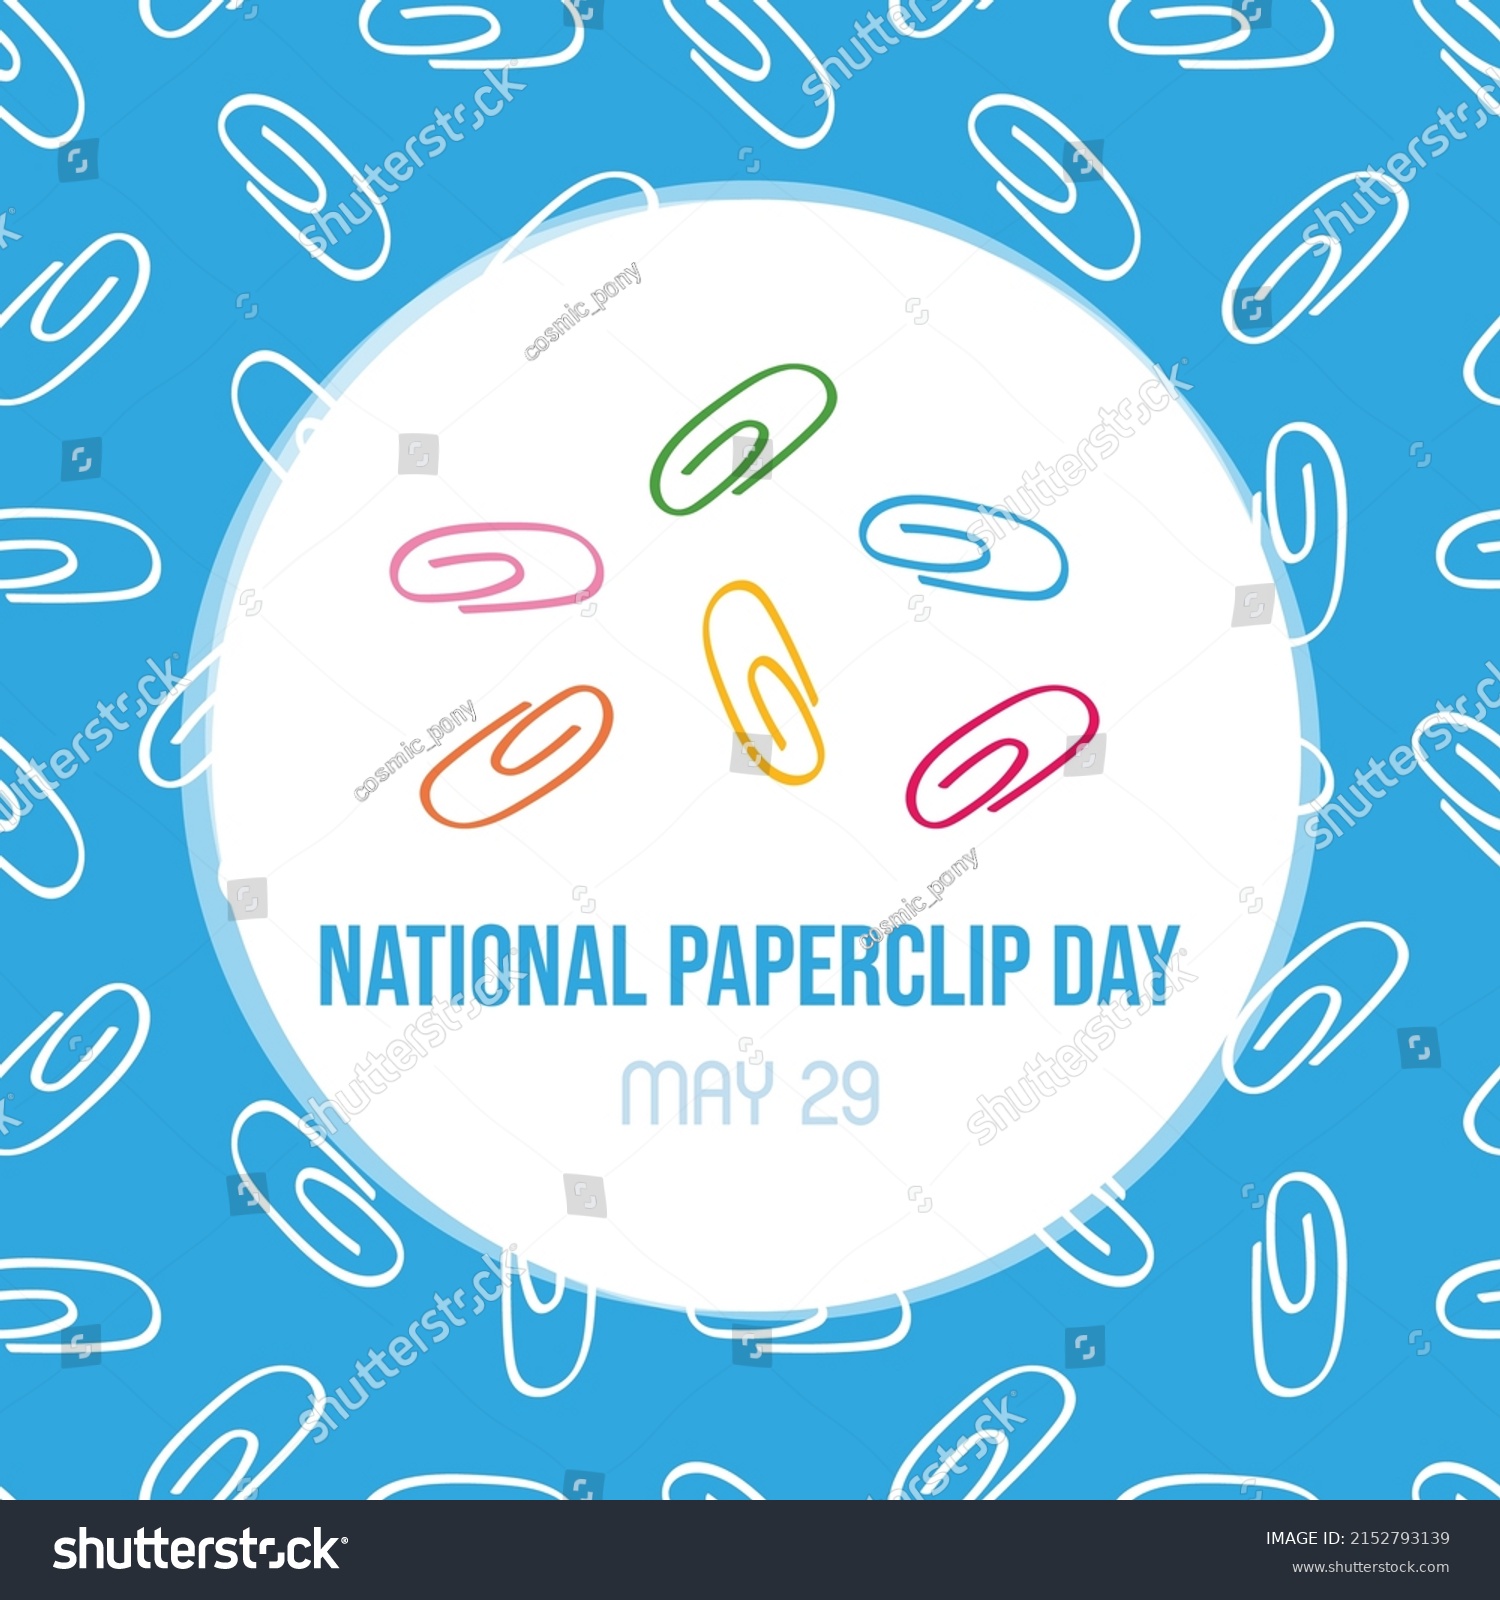 SVG of National Paperclip Day greeting card, vector illustration with cute doodle style paperclips seamless pattern. May 29. svg